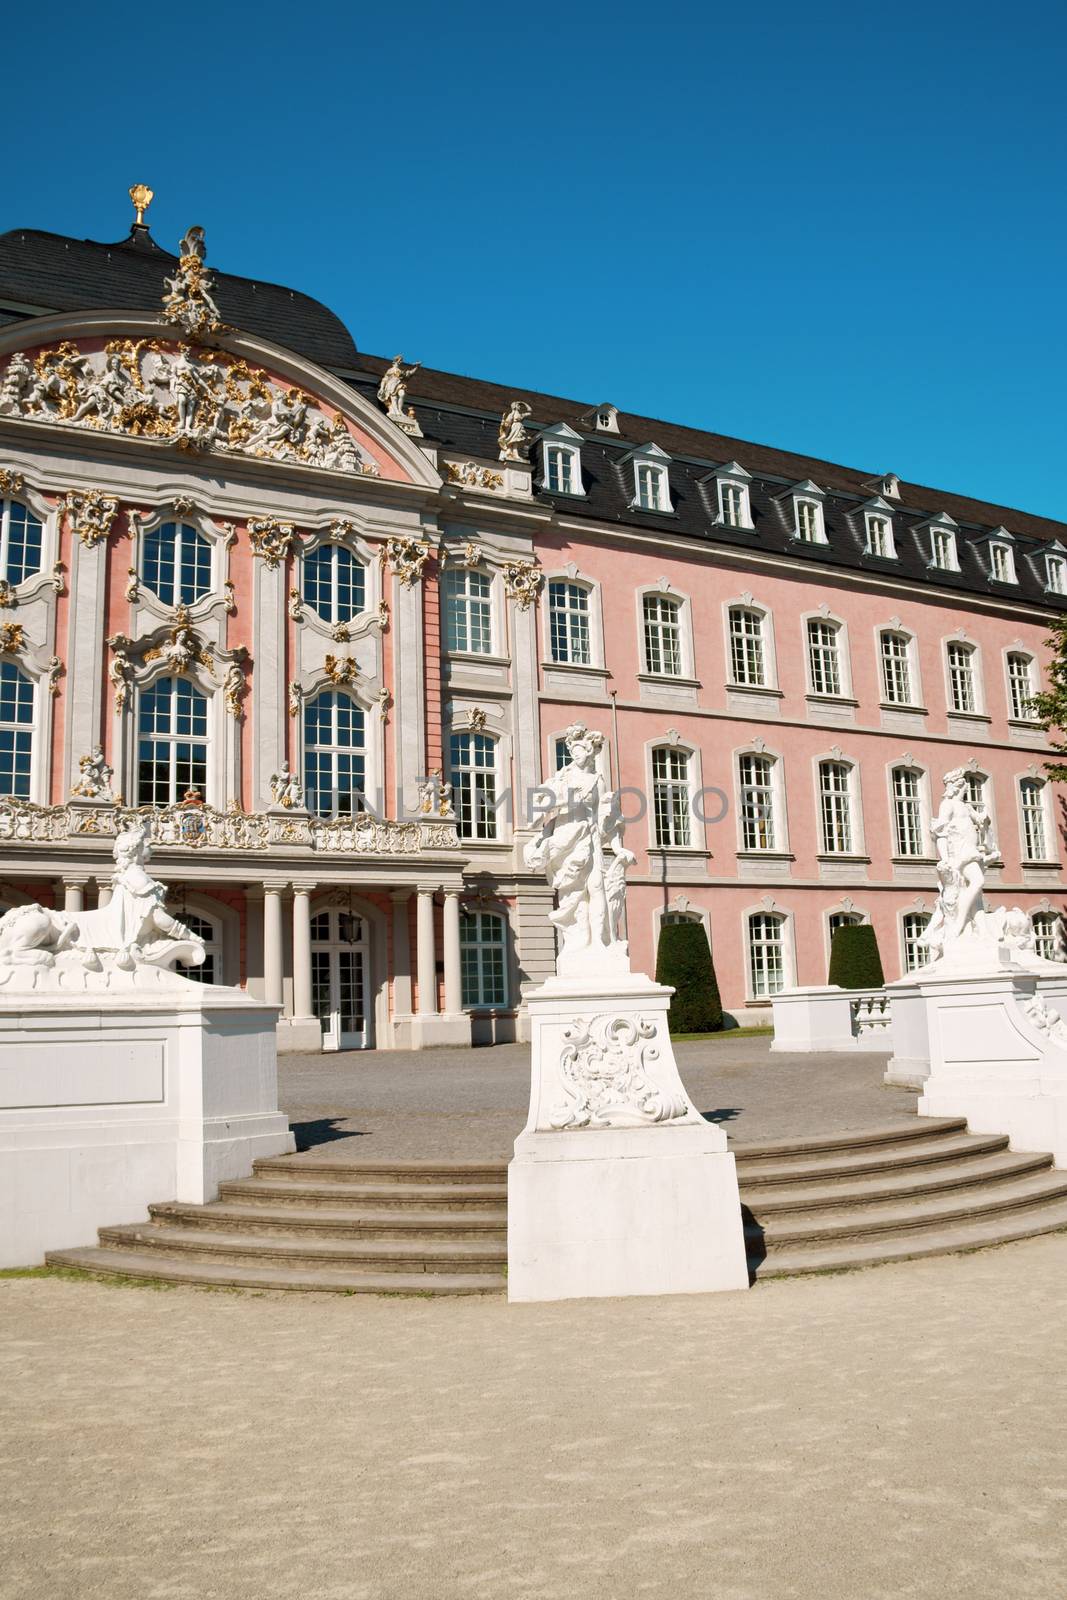 South wing of Prince-electors Palace in Trier, Germany. It was built in rococo style from 1756 by architect Johannes Seiz and the sculptor Ferdinand Tietz.